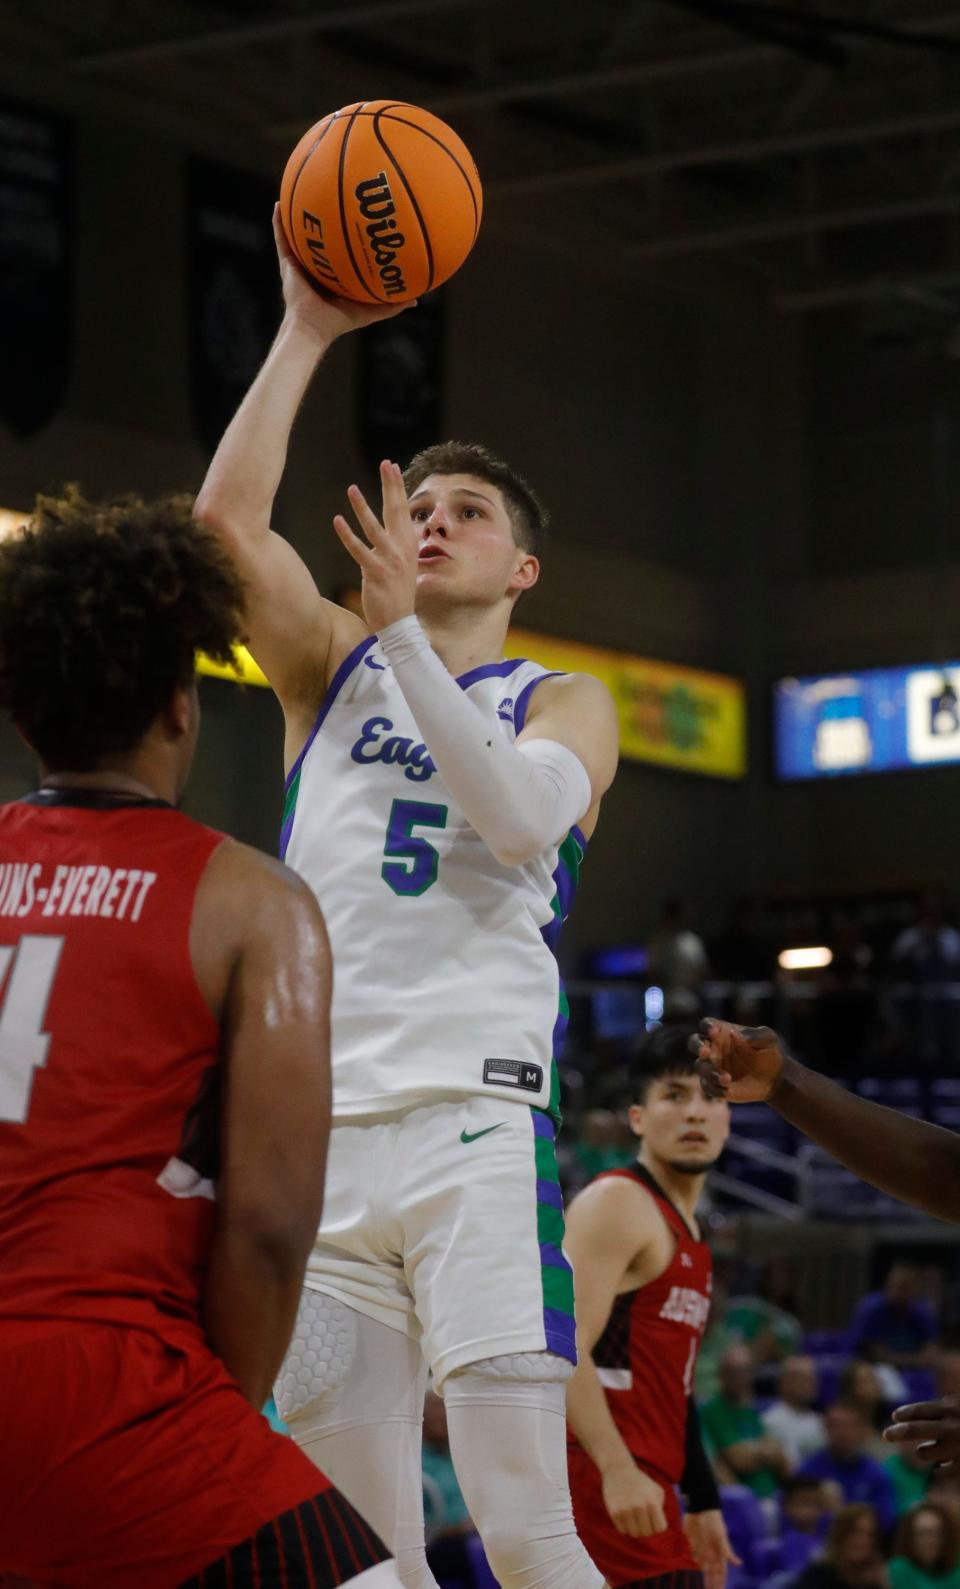 FGCU player Chase Johnston drives to the basket. The Florida Gulf Coast University men's basketball team defeated visiting Austin Peay 89-71 in their final game of the regular season Friday, Feb. 24, 2023.